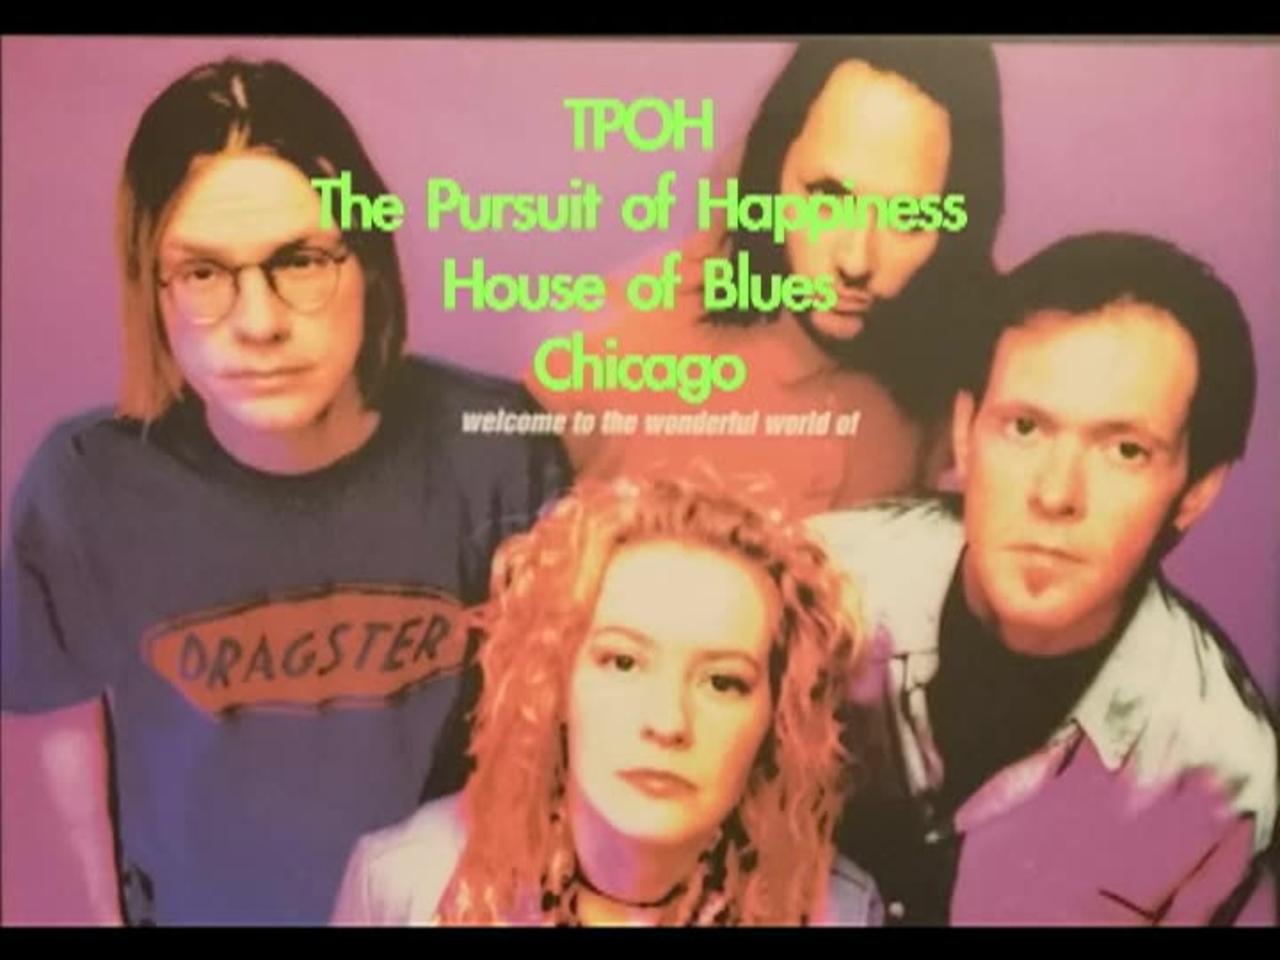 1996 - TPOH (The Pursuit of Happiness) at Chicago's House of Blues